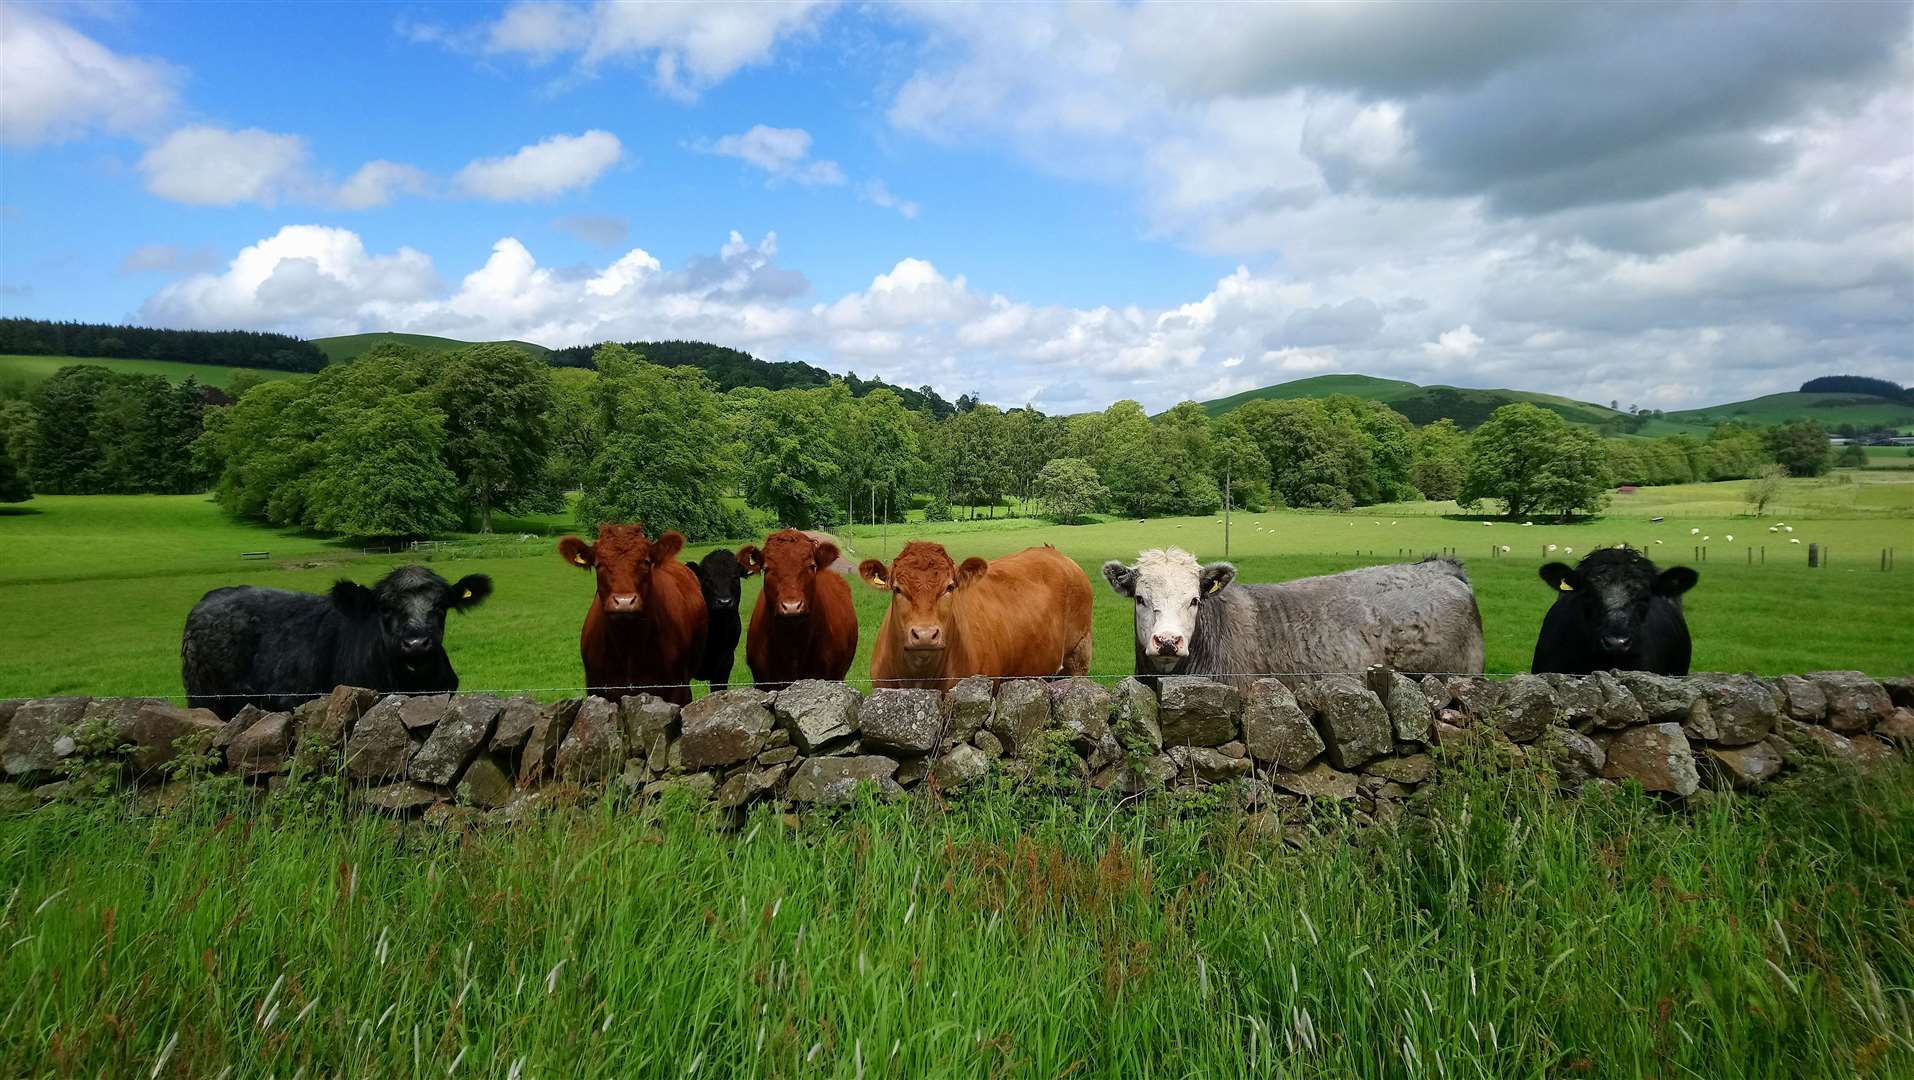 Trees can offer many benefits including as shade and shelter for livestock. Picture: Jayne Adamson